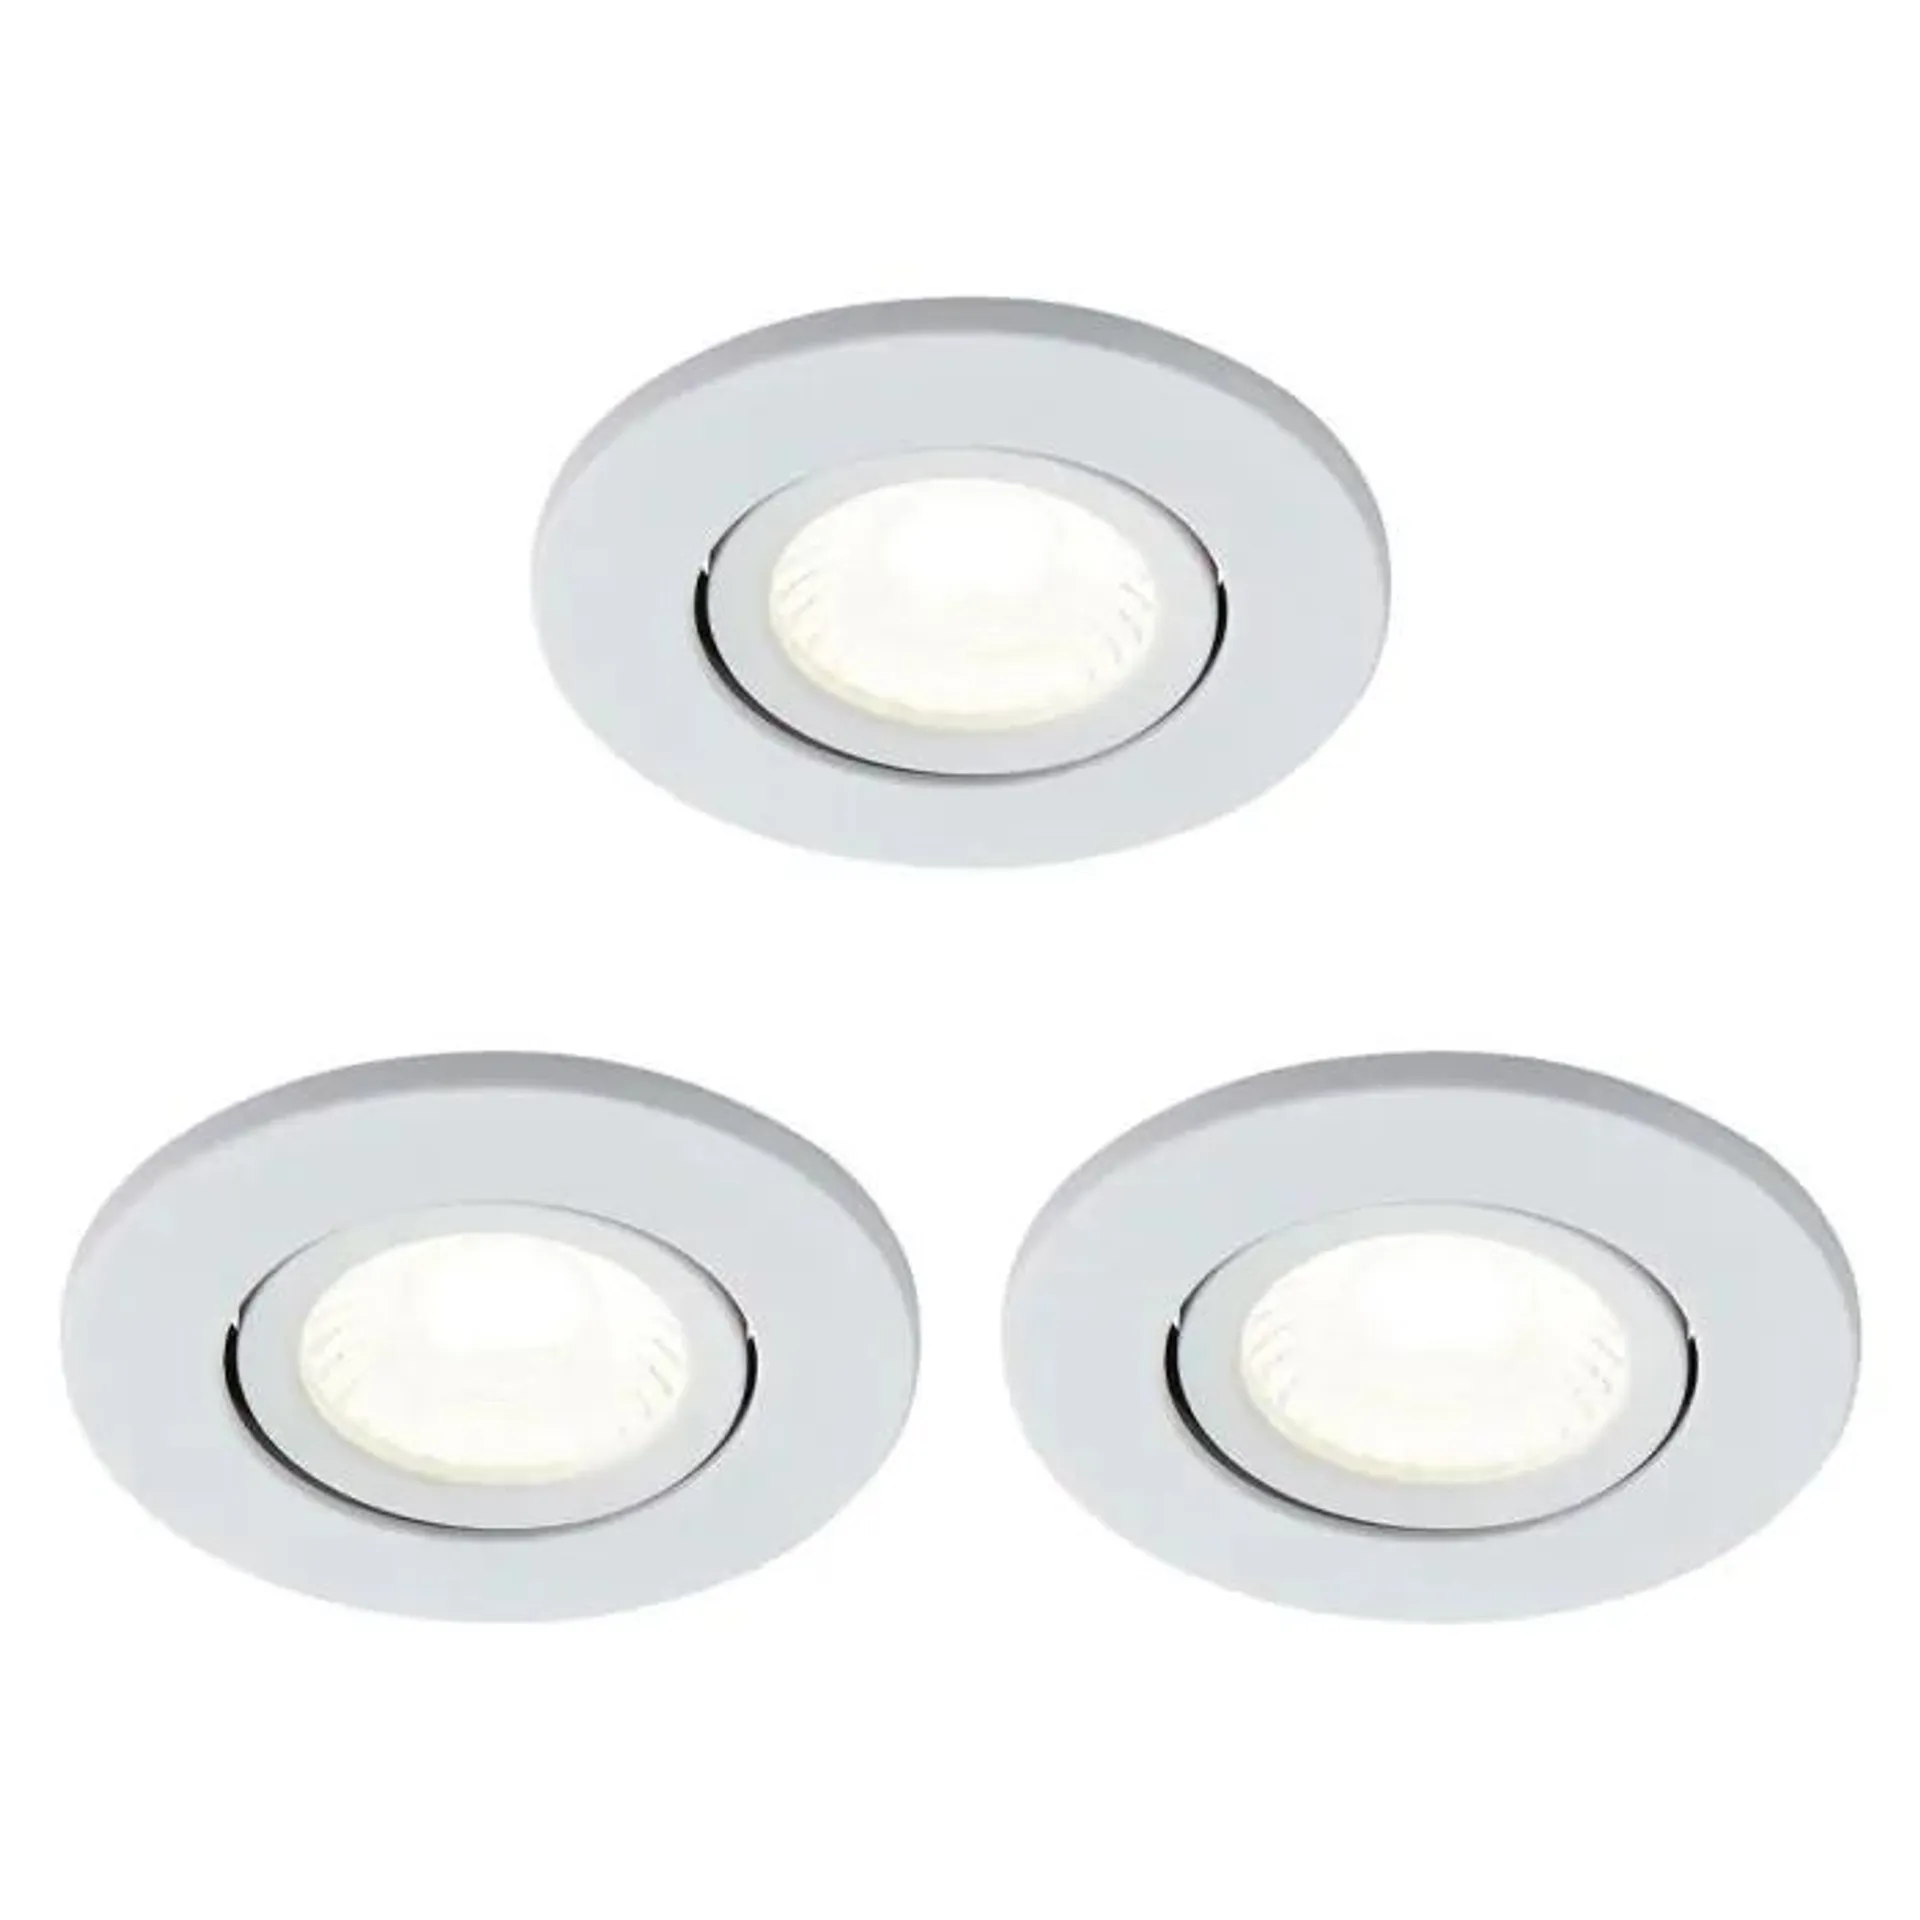 3 Pack of Ruva Fire Rated LED IP65 Downlight, Matte White